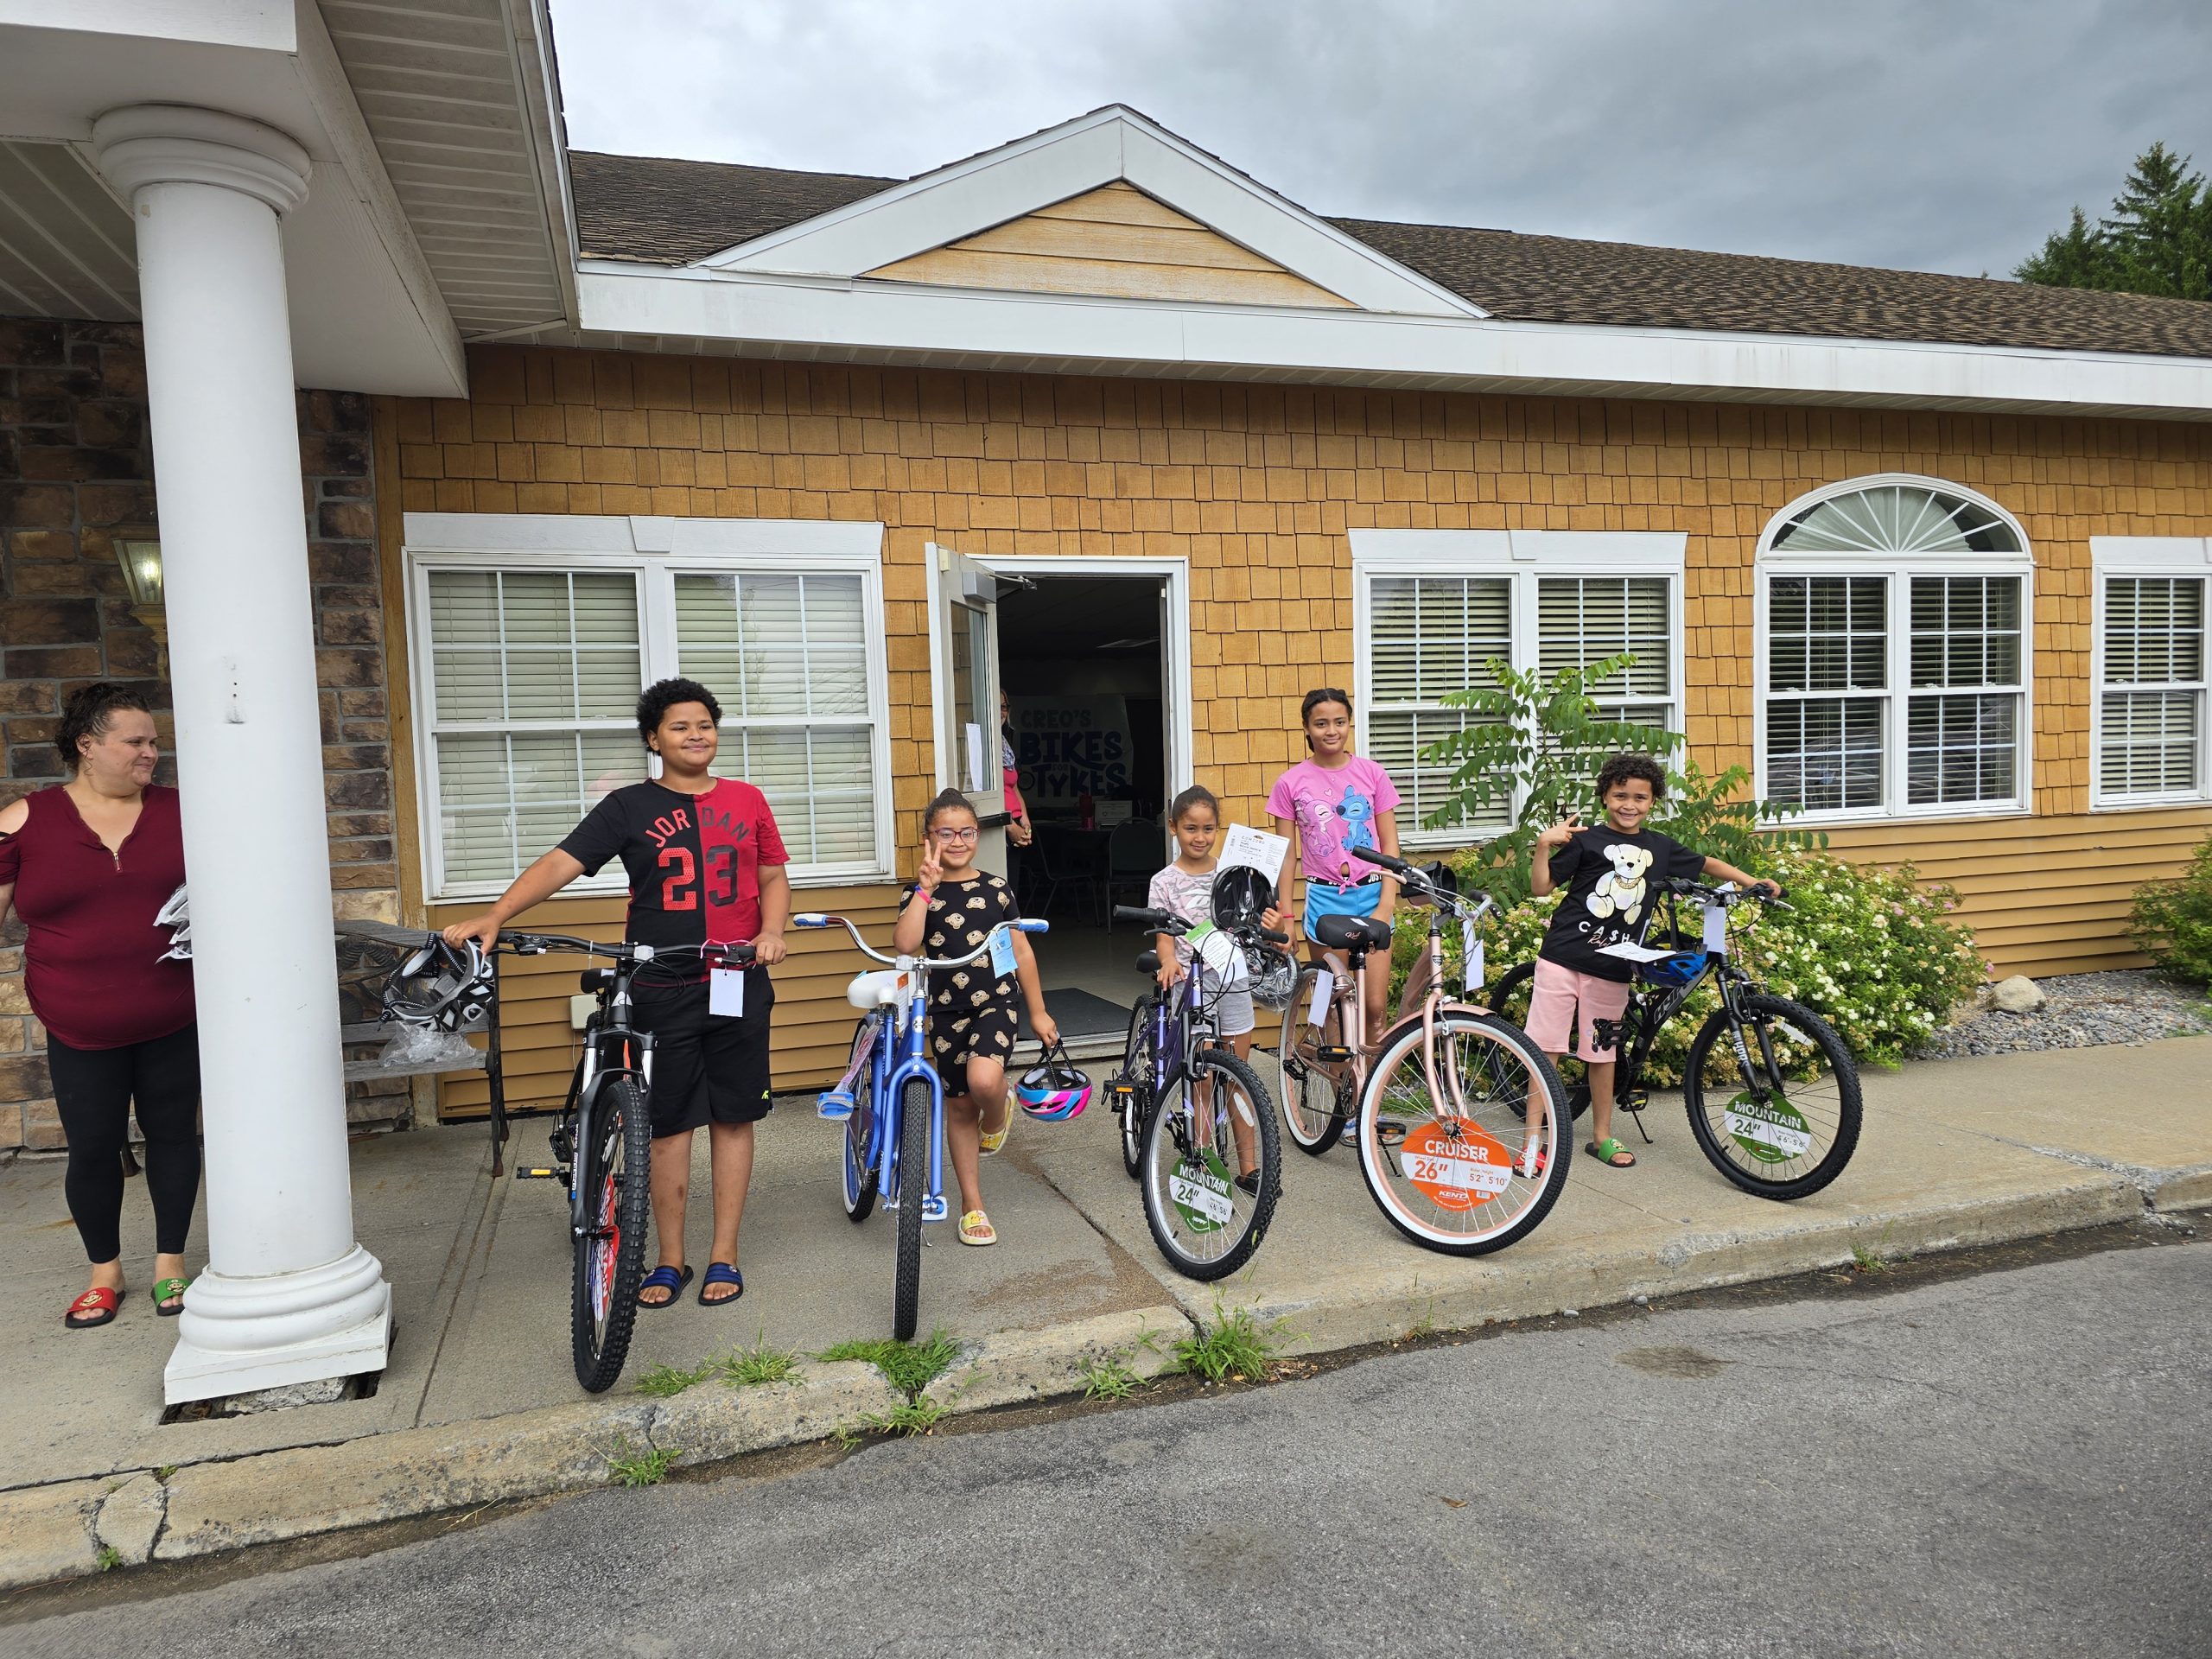 The Neighborhood Center Hosts Another Successful Creo’s Bikes for Tykes Giveaway with Support from the Edwin J. Wadas Foundation